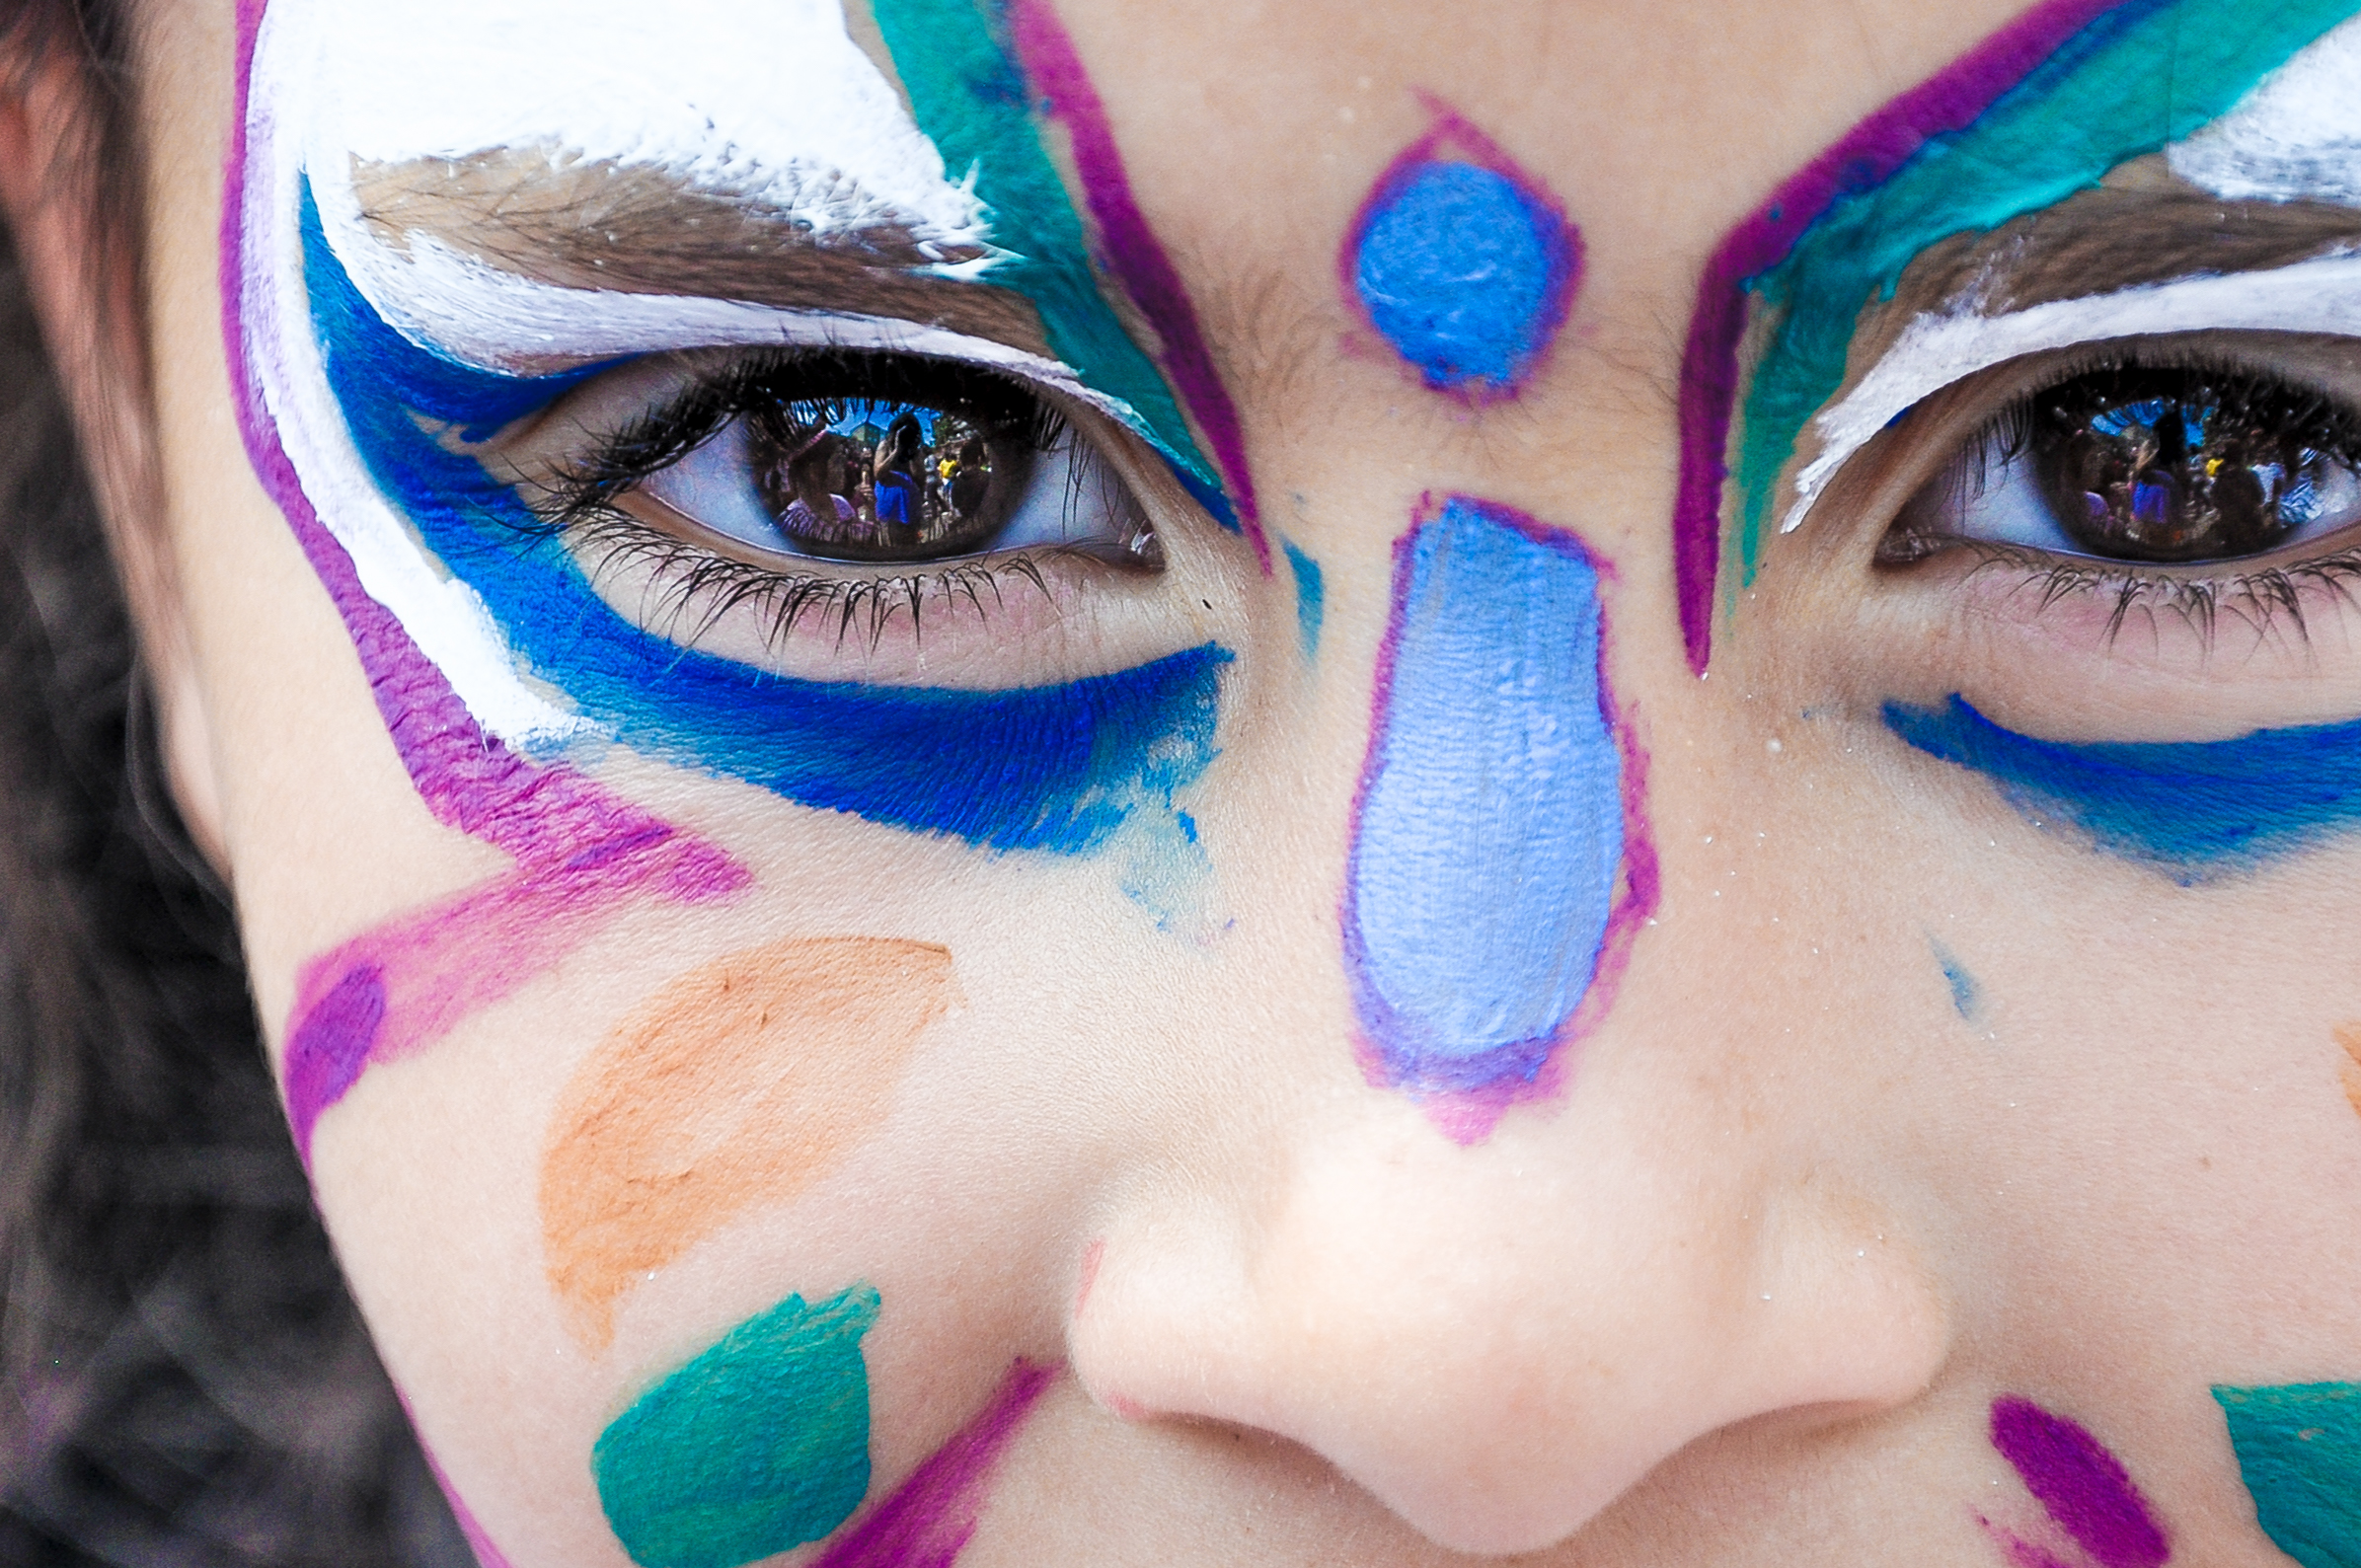 Girl with face painting, Art, Joy, Summer, Smile, HQ Photo